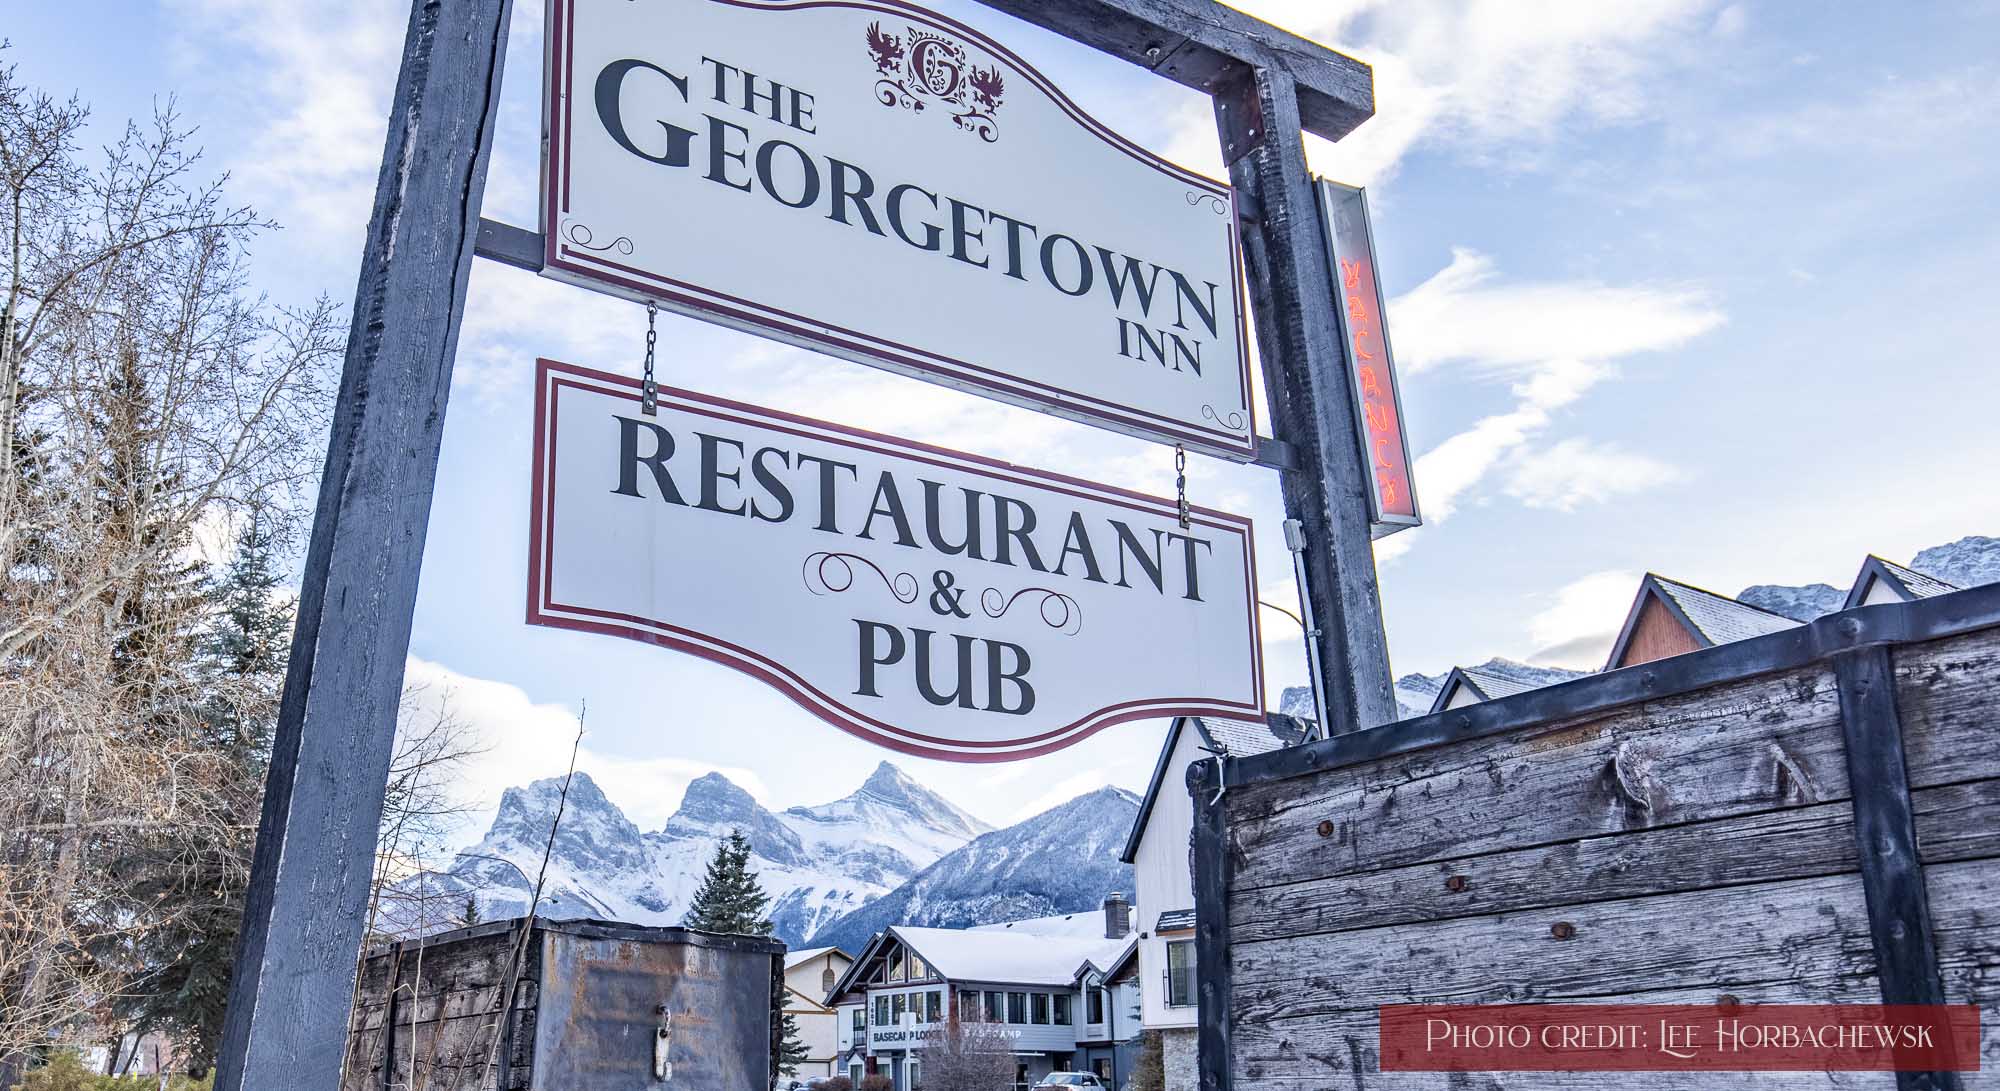 The Georgetown Inn's exterior sign in winter.